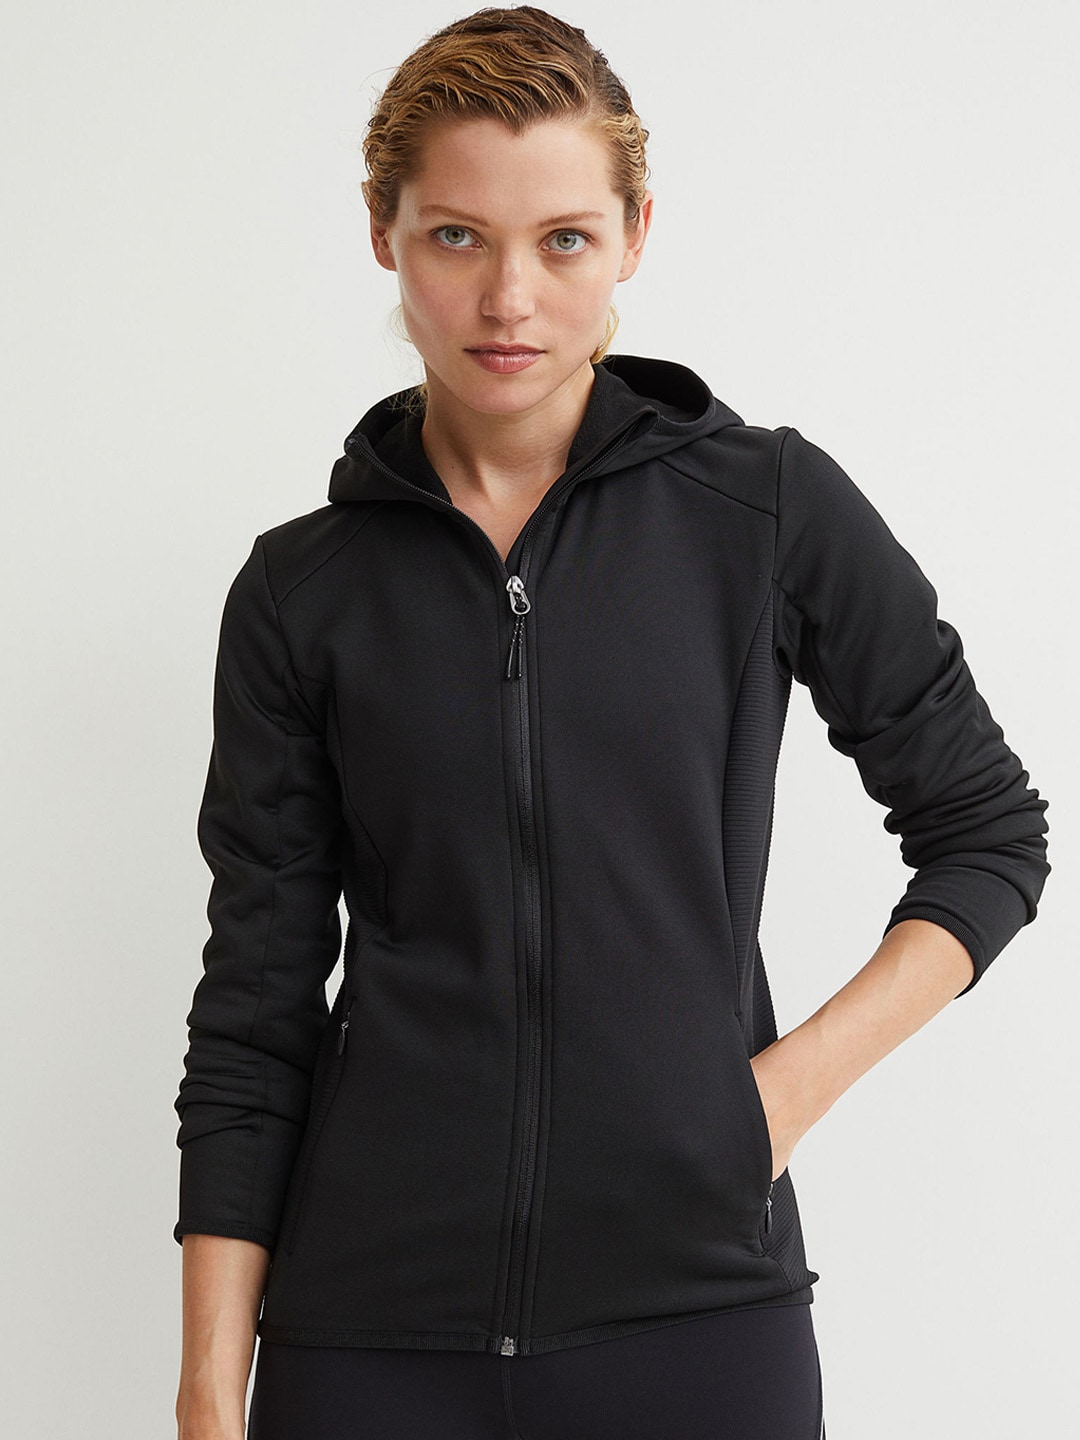 H&M Women Black Hooded Outdoor Jacket Price in India